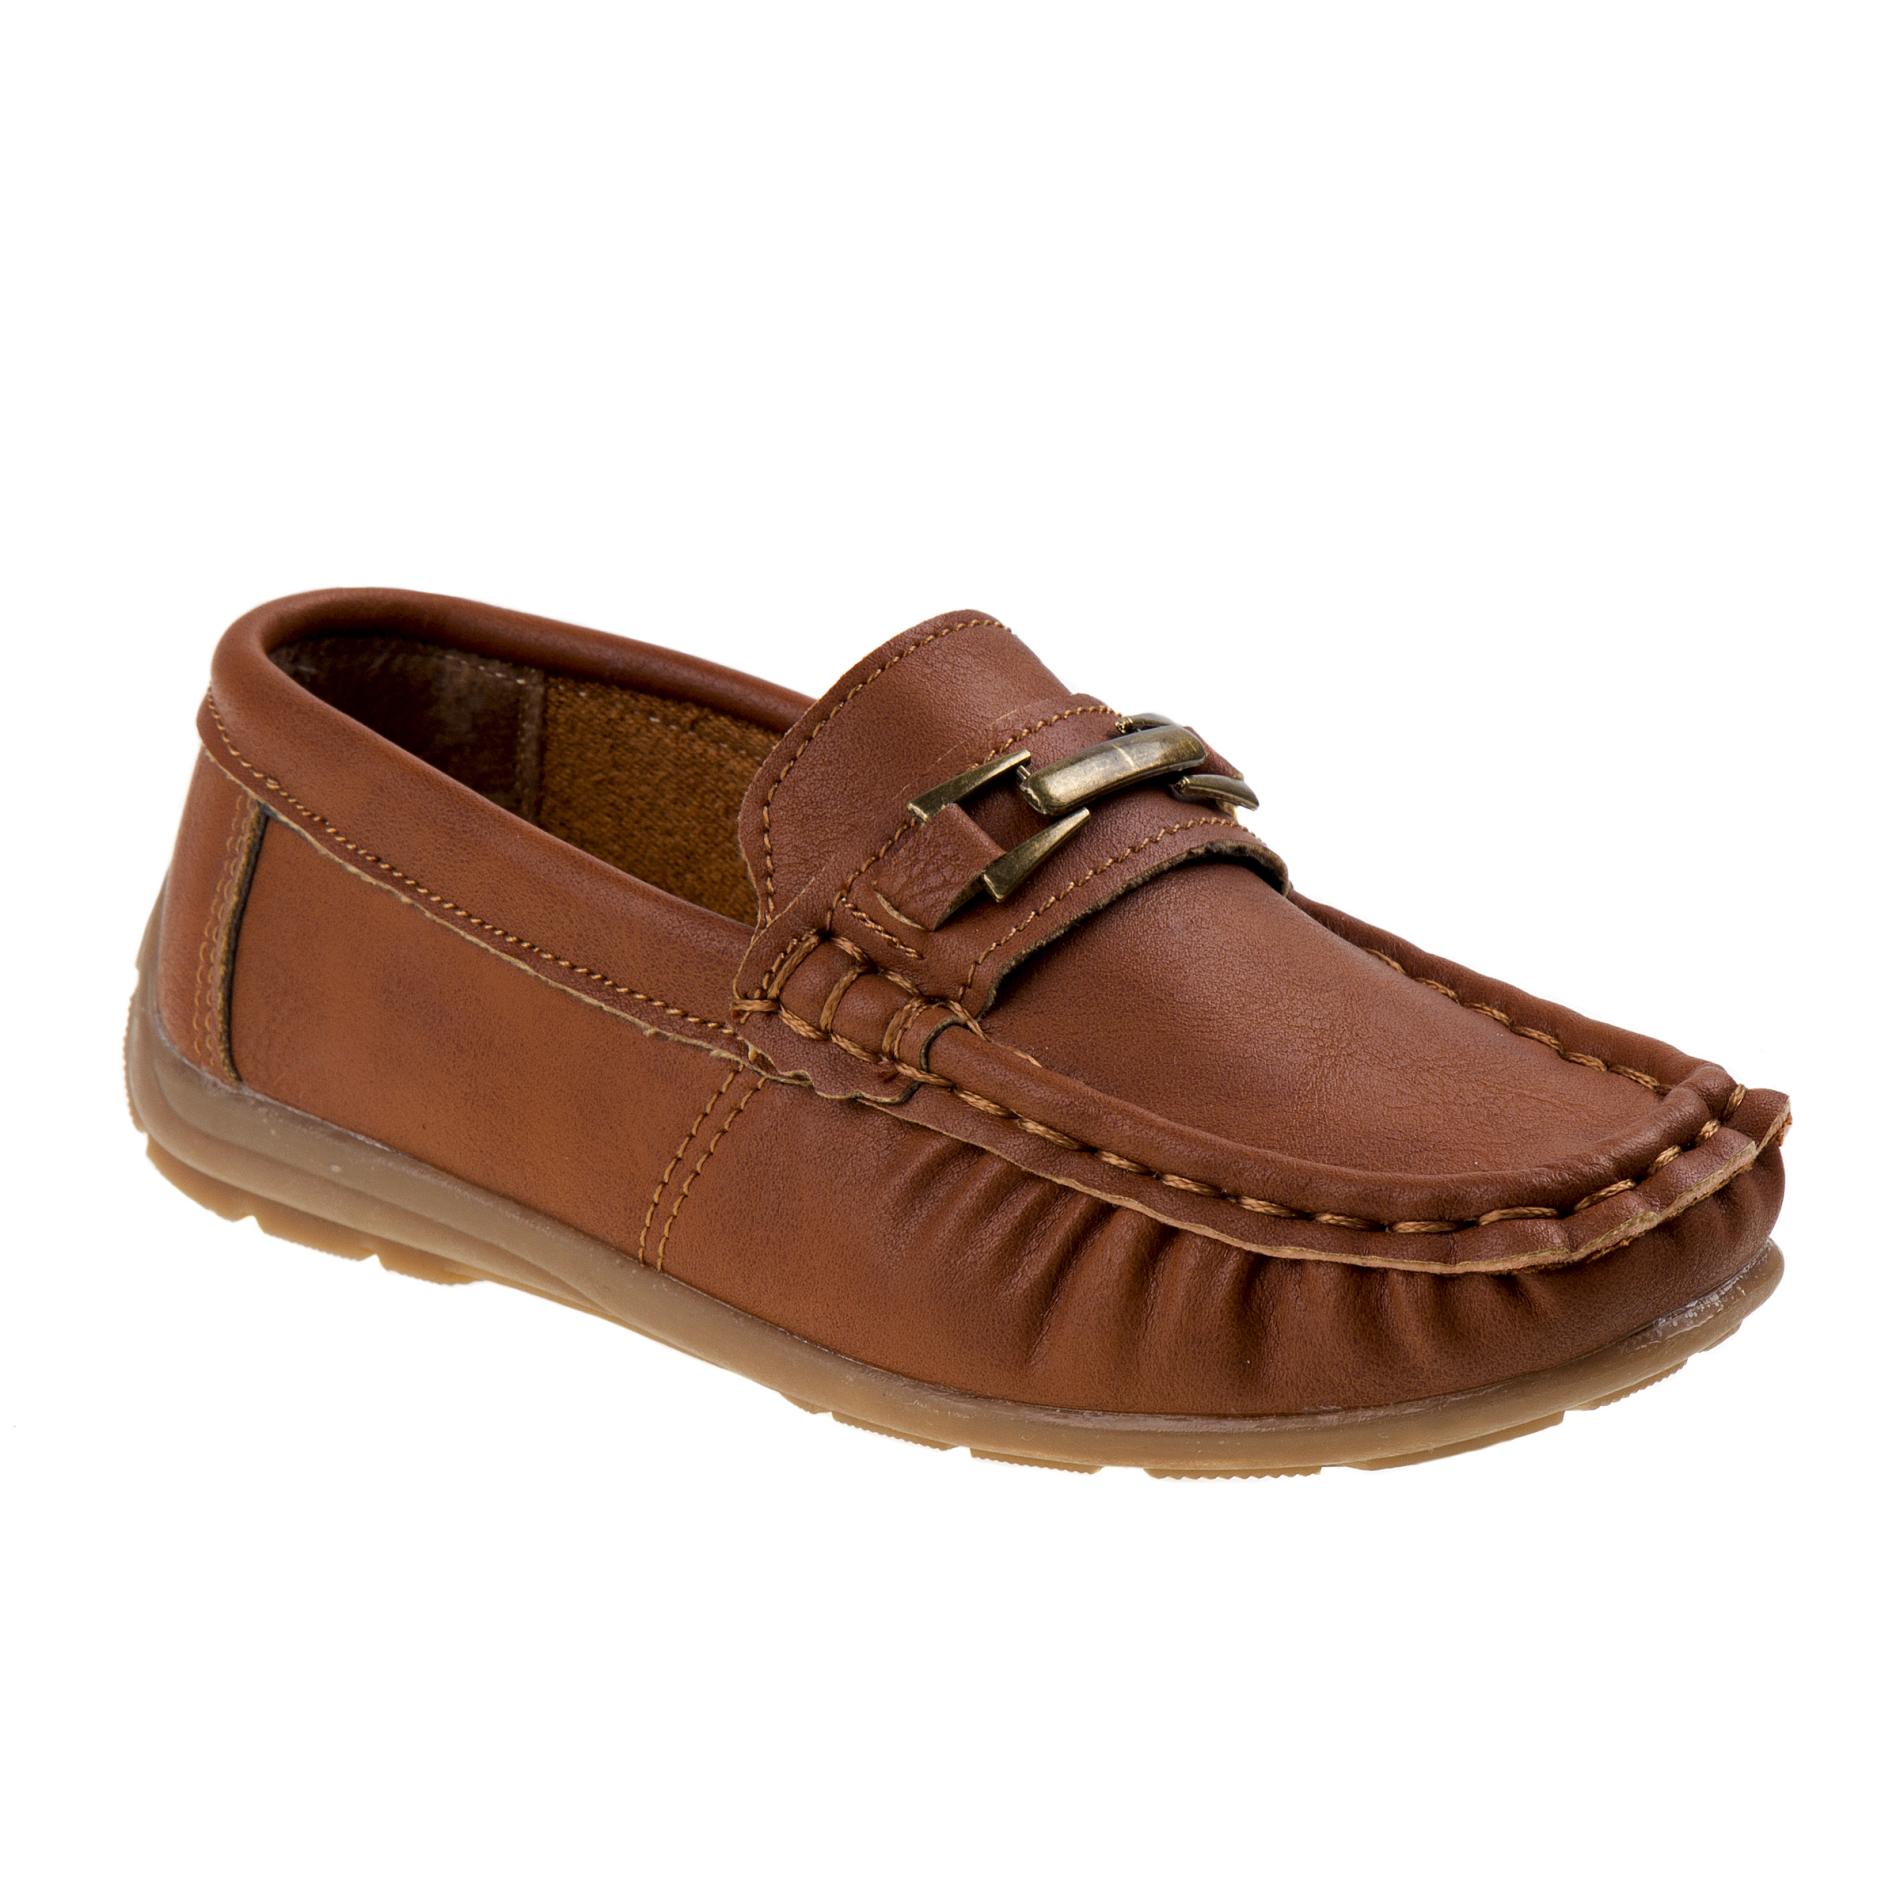 Josmo Boys' Brown Loafer